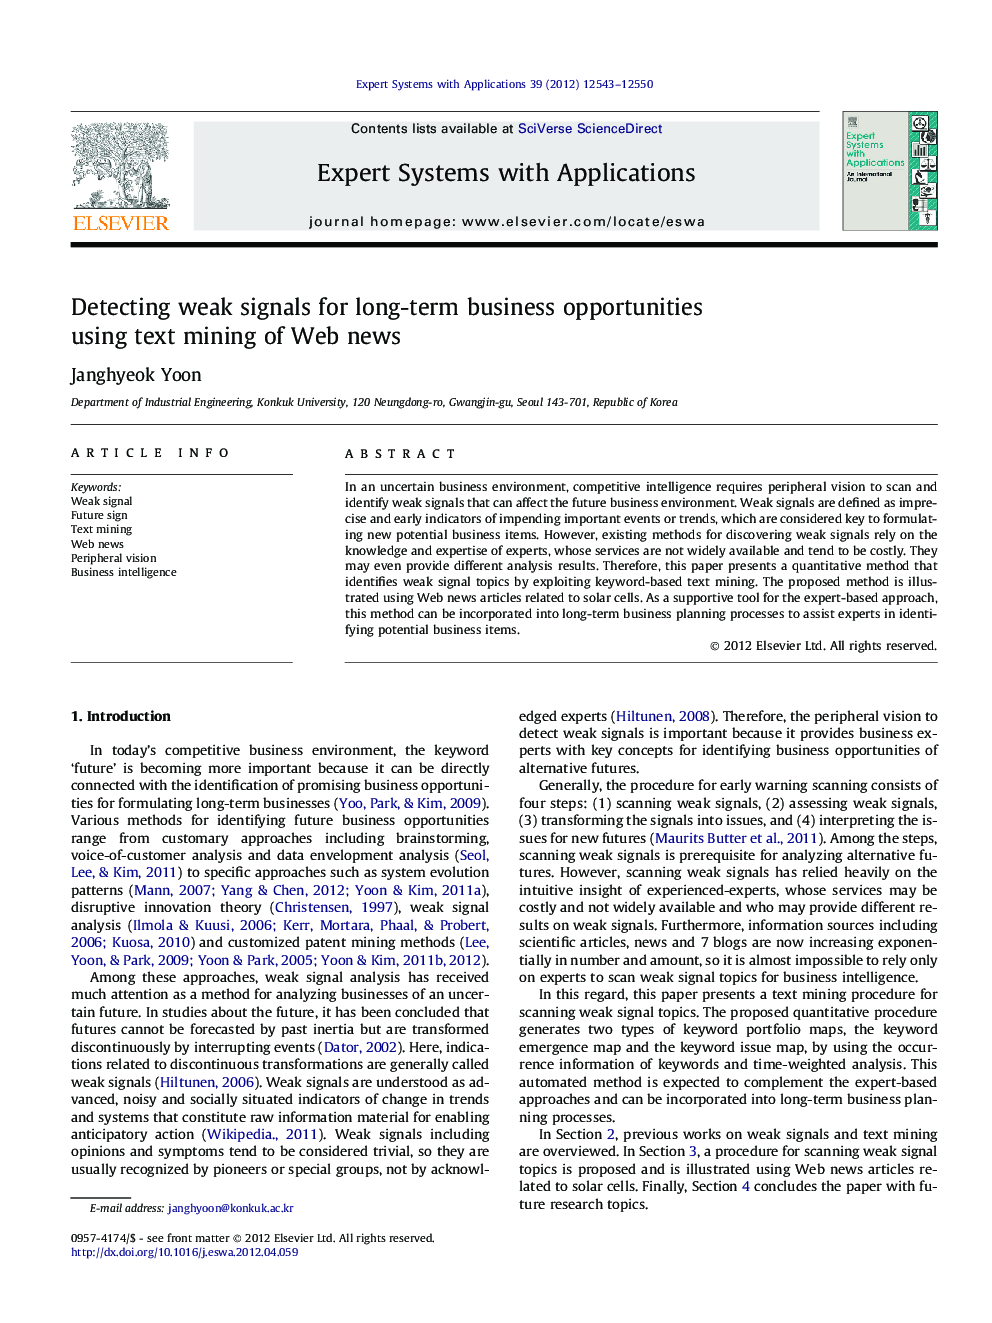 Detecting weak signals for long-term business opportunities using text mining of Web news